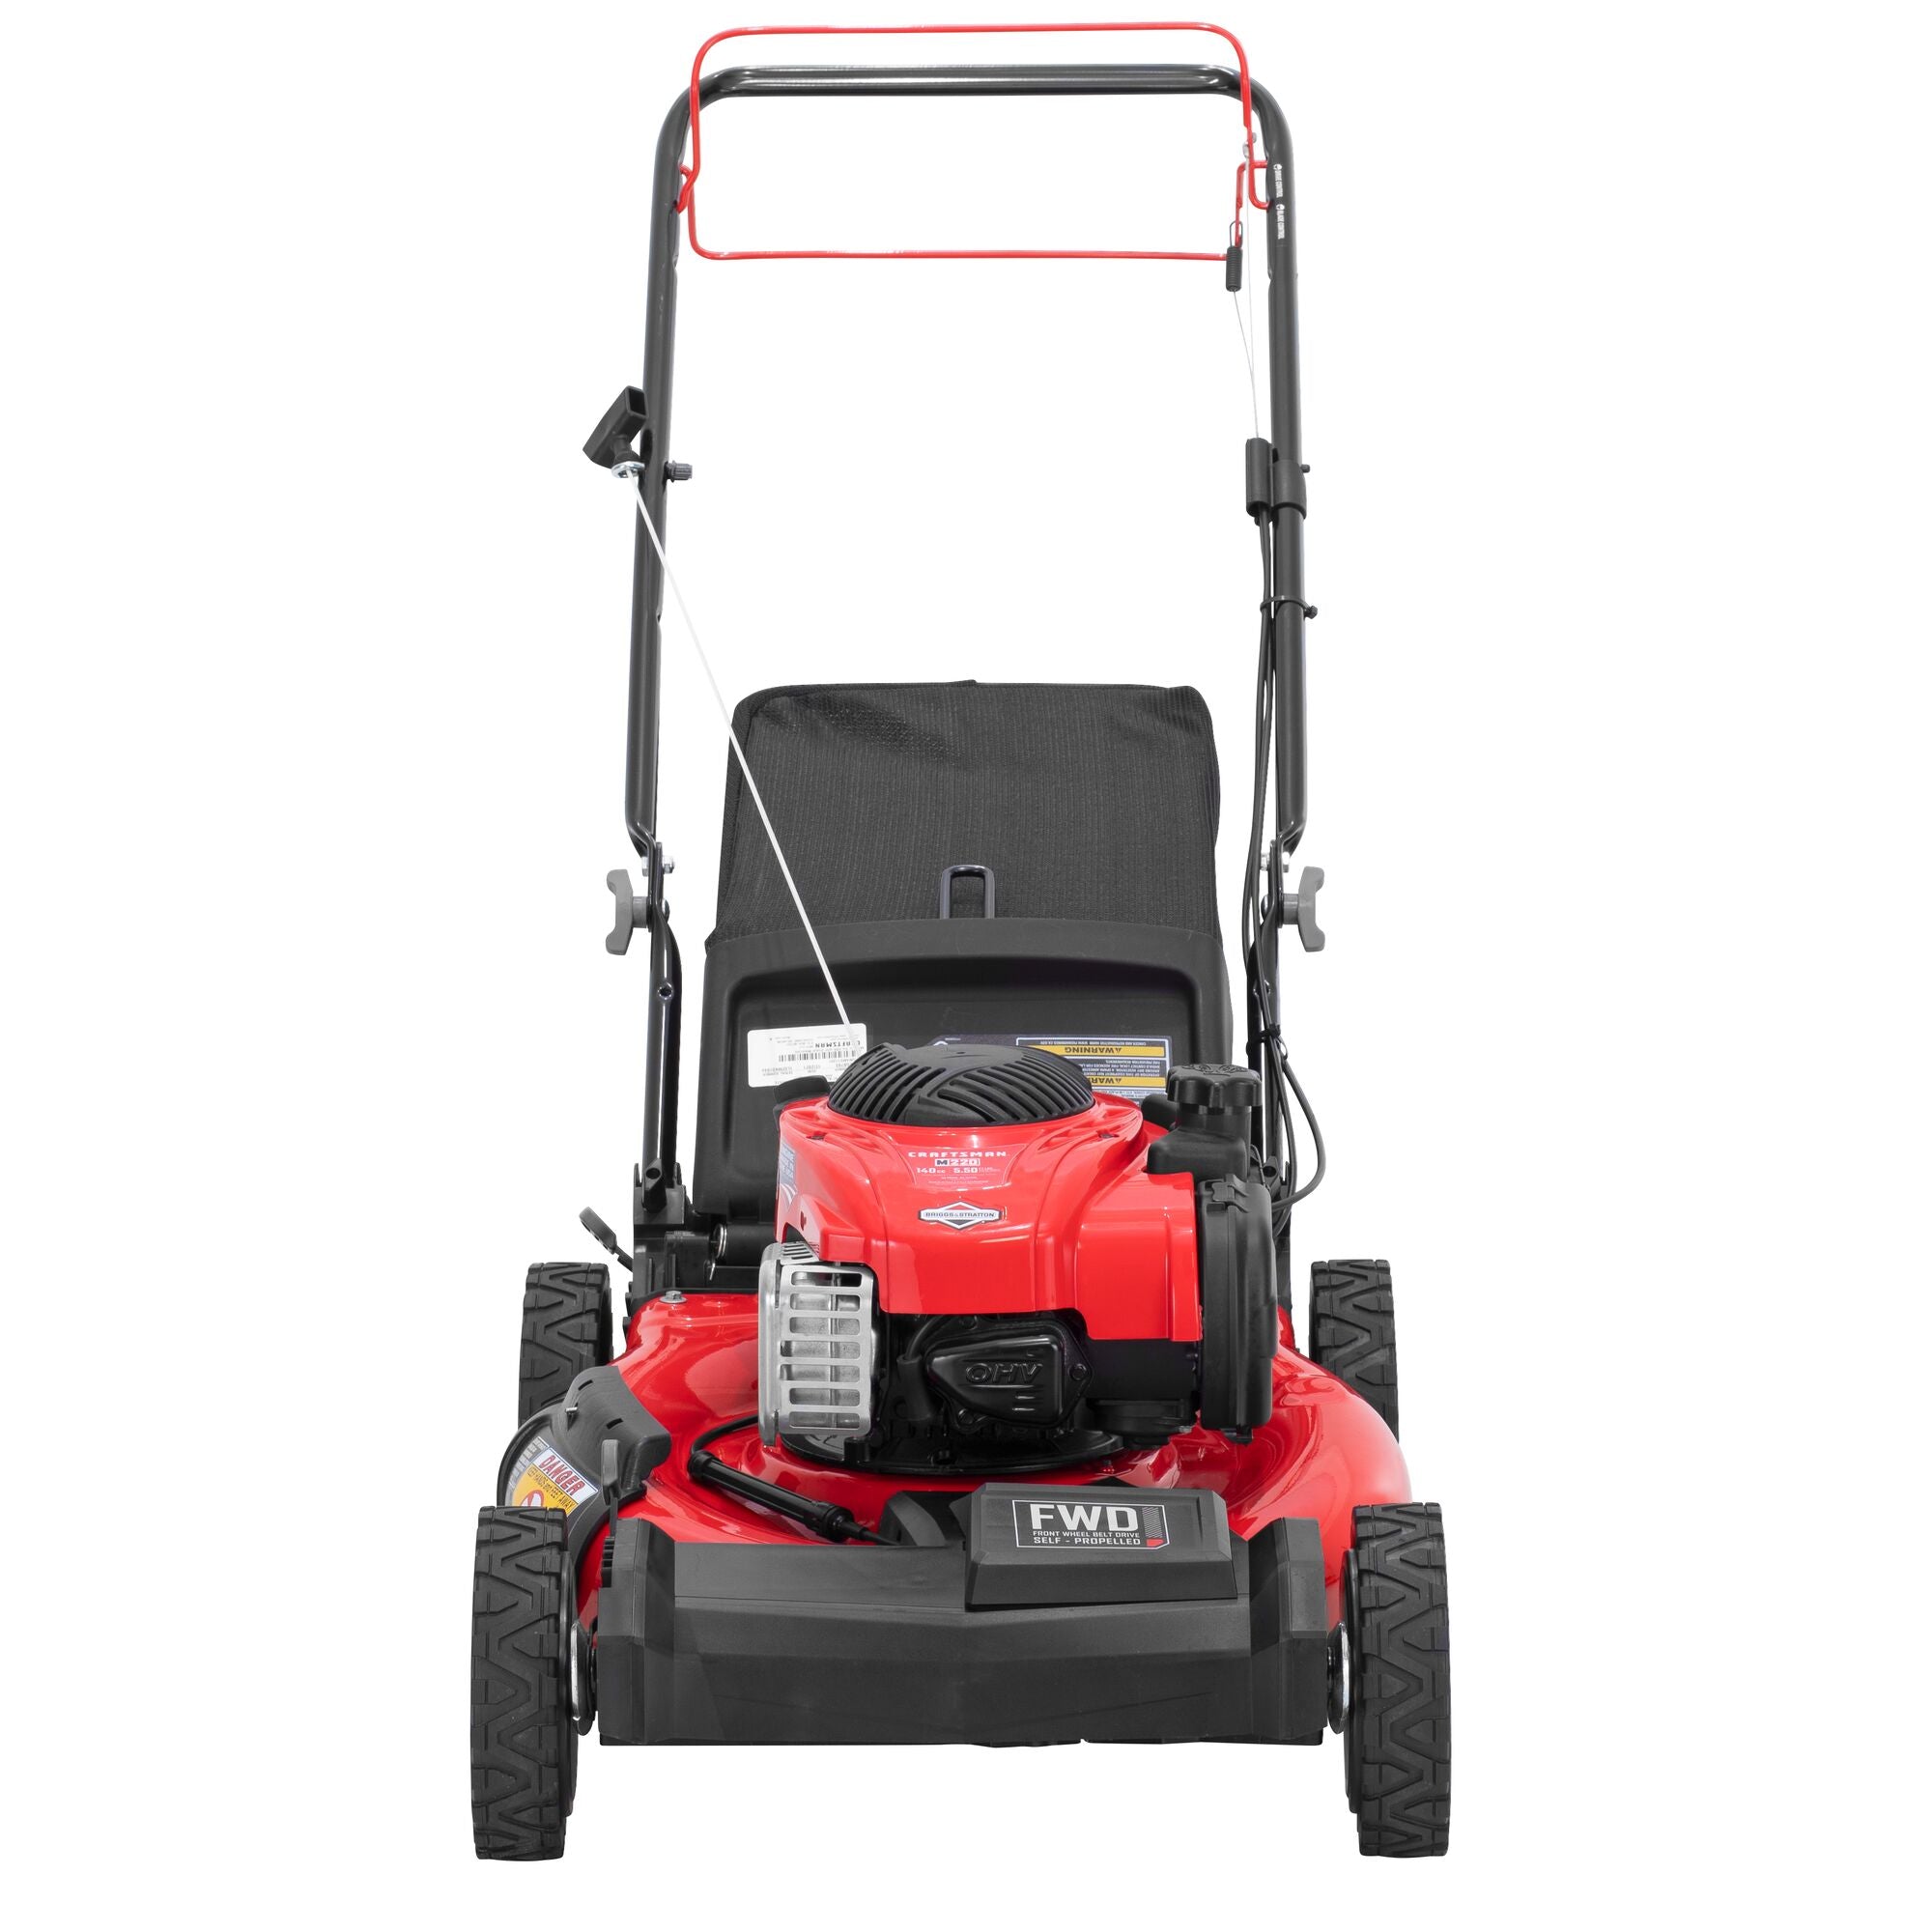 M220 140-Cc 21-In Self-Propelled Gas Push Lawn Mower With Briggs